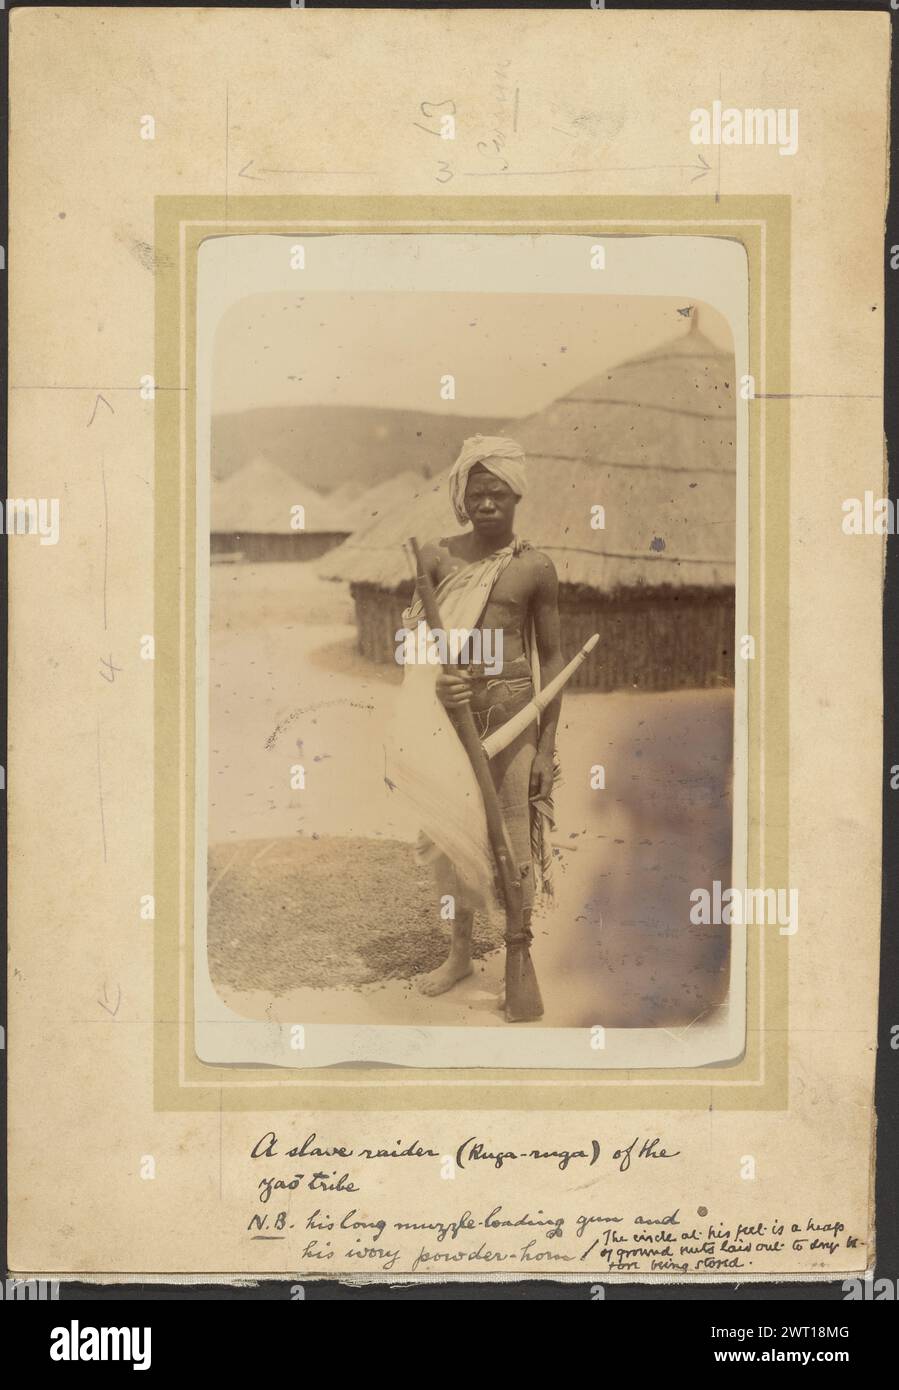 A Thorough Scoundrel. Unknown, photographer 1910 A young man holding a rifle with a powder horn hanging from his waist. He has a piece of fabric tied around one shoulder like a cape, draped over one arm, and is wearing another cloth draped like a turban around his head. There is a pile of ground nuts at his feet and a hut with a thatched roof behind him. (Recto, mount) upper center, pencil: '13/Swann/3'; (Recto, mount) center left, pencil: '4'; (Recto, mount) lower center, black ink: 'A slave raider (Ruga-ruga) of the/Yao tribe/N.B. his long muzzle loading guns and/his ivory powder-horn / The Stock Photo